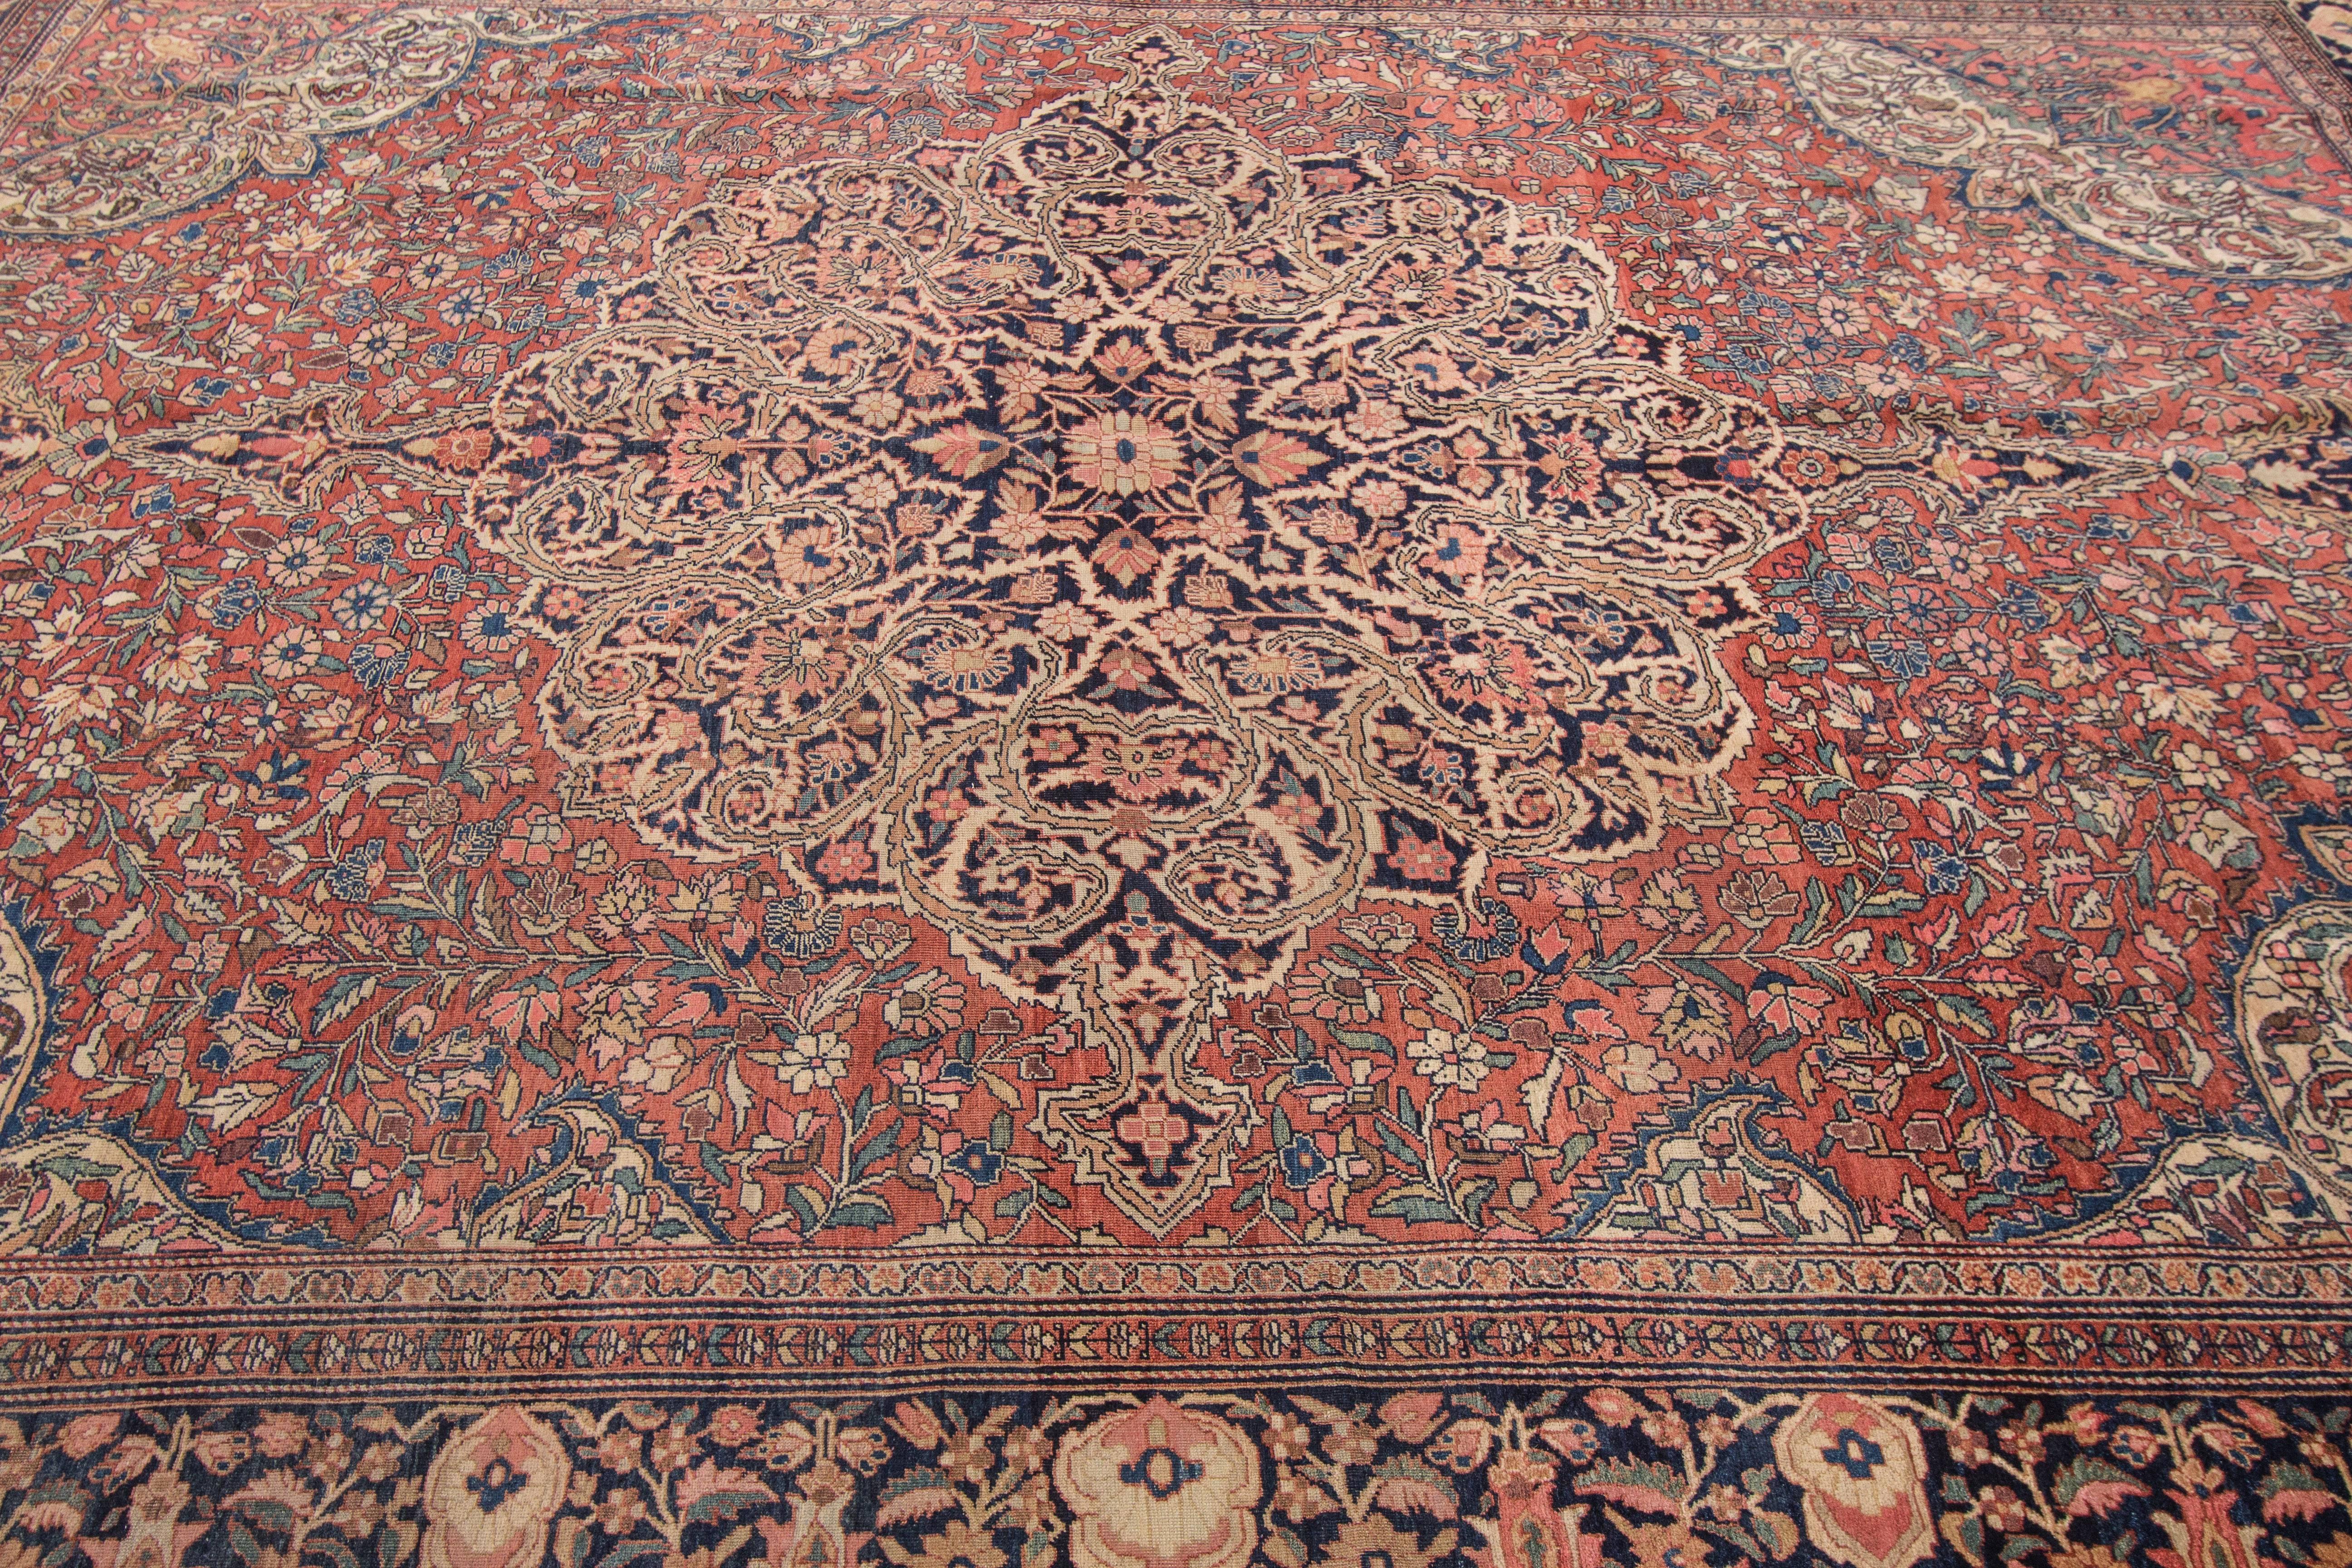 Measures: 8.4” x 11.2”
Farahan rugs are a very aesthetically pleasing group. They drew upon a sophisticated design repertoire without the formality of a city workshop carpet. Technically there are a well-made carpet and as a rule the dyes were very